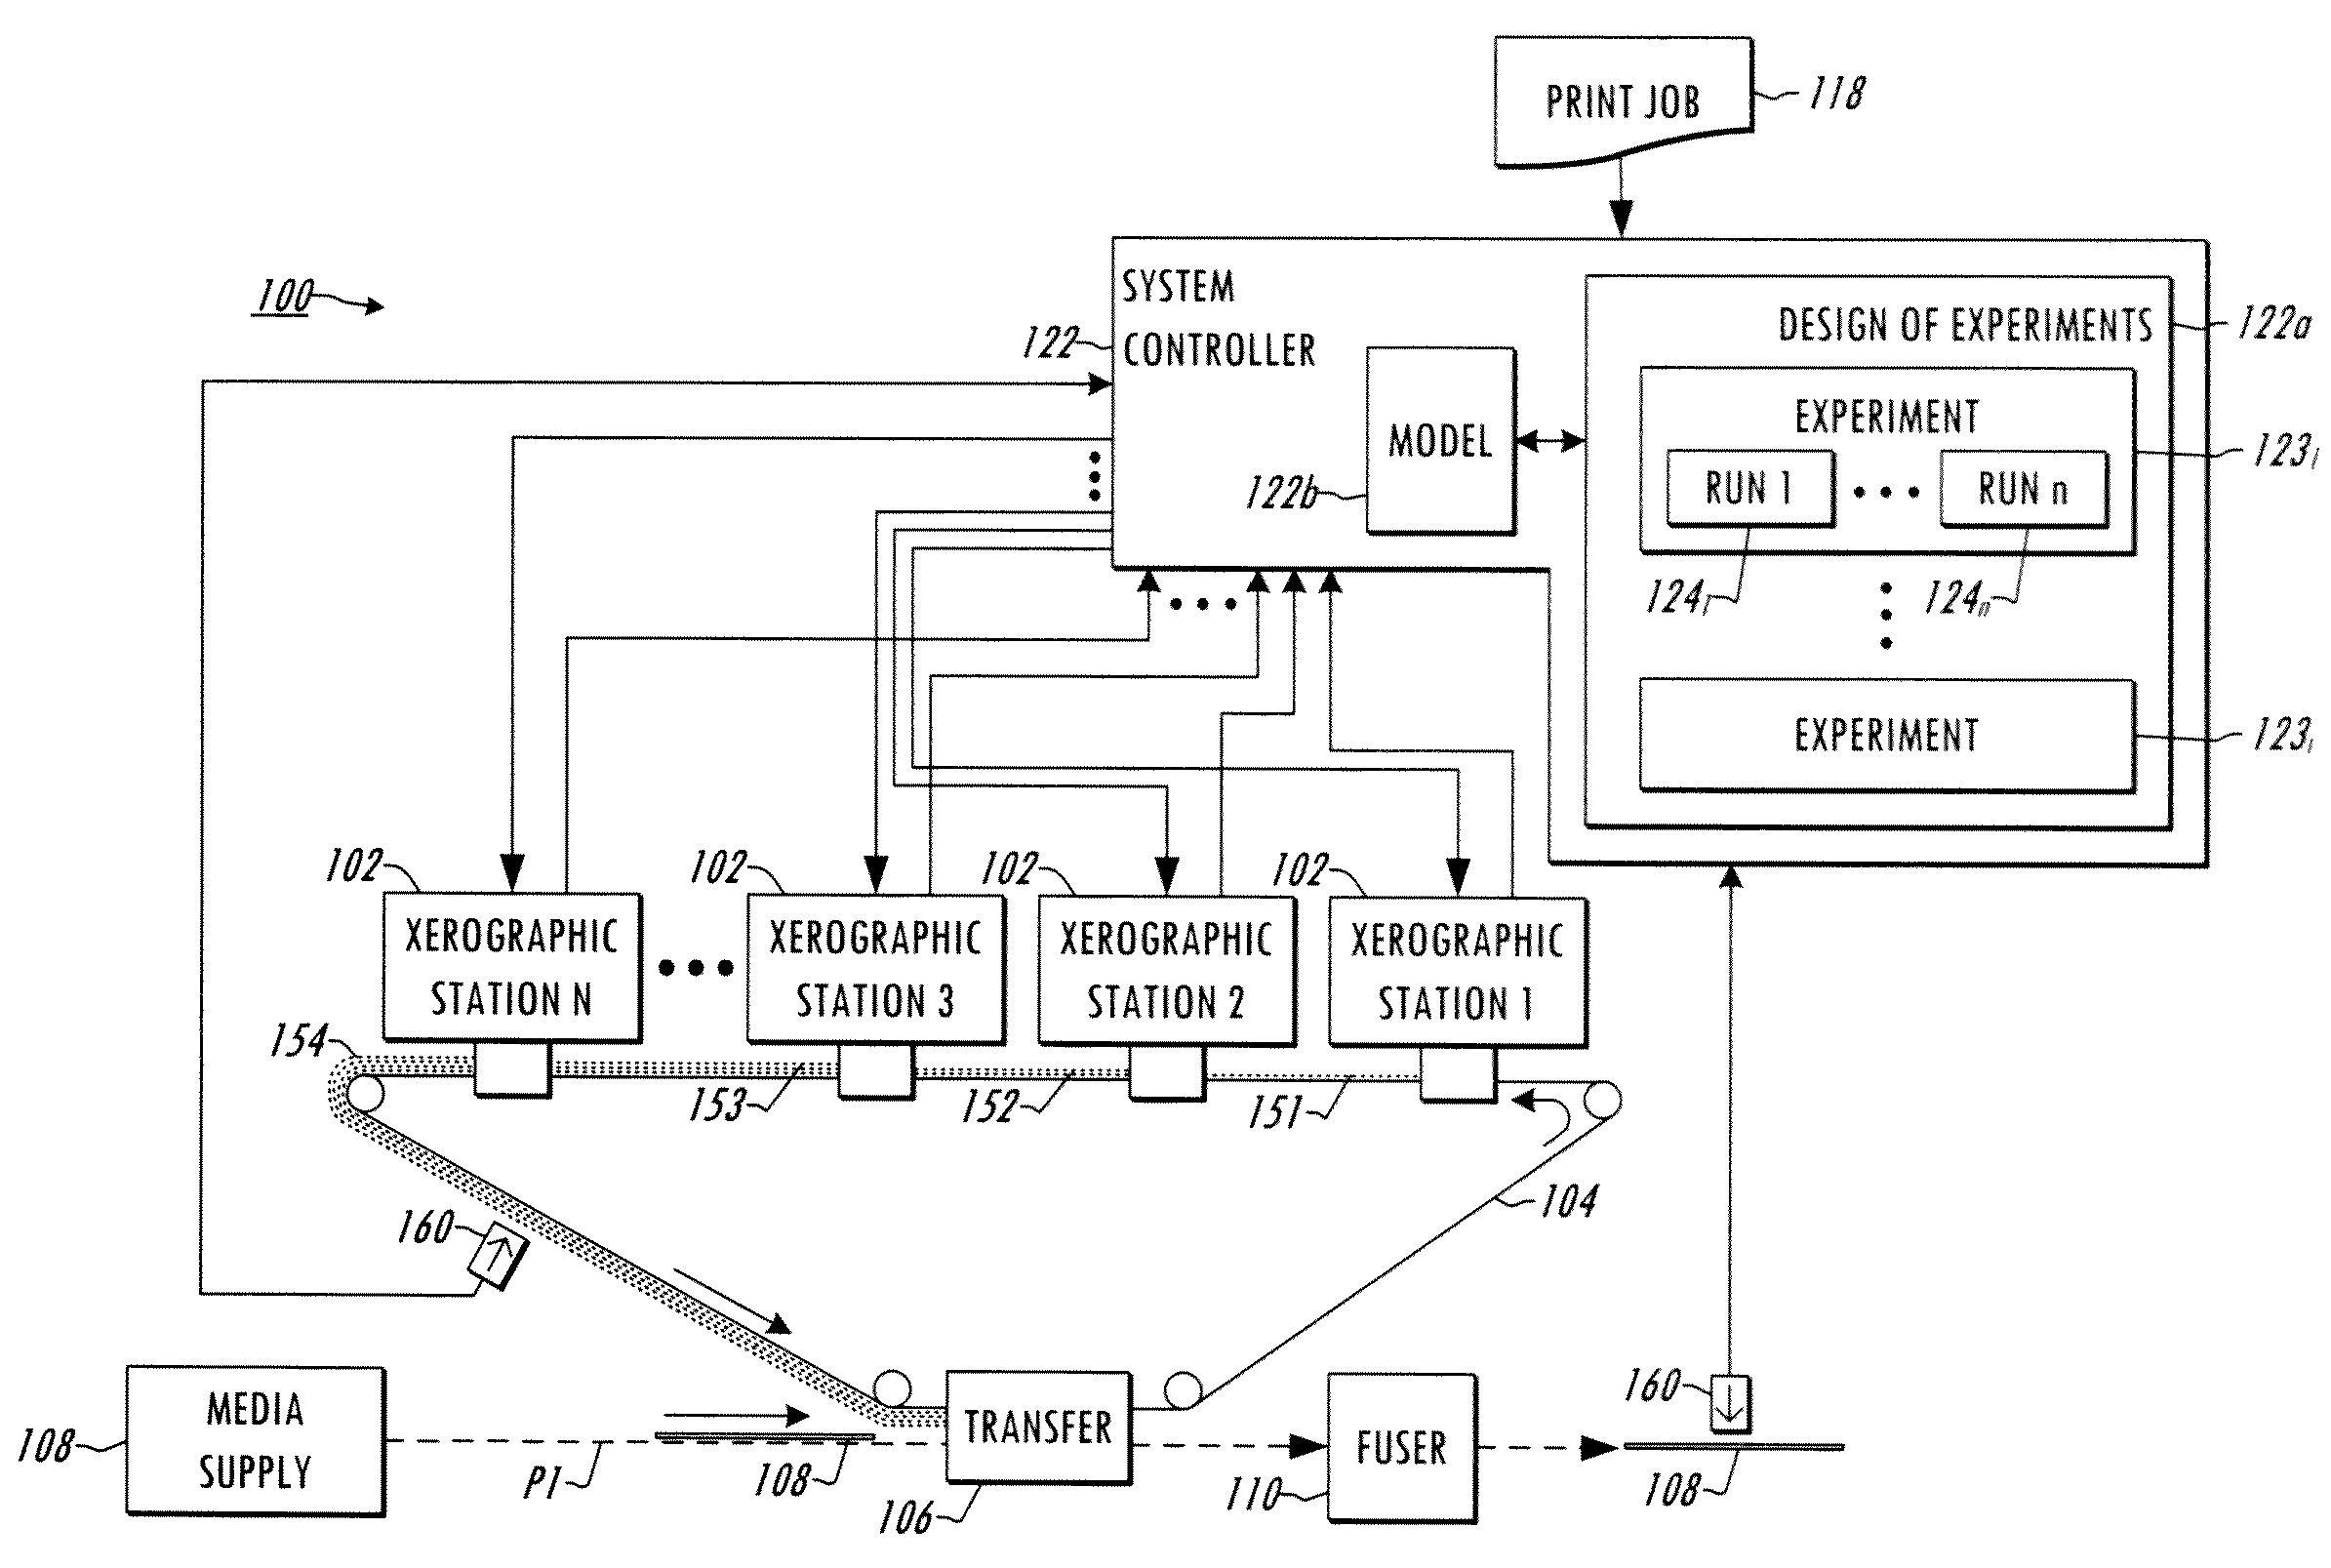 Production system control model updating using closed loop design of experiments